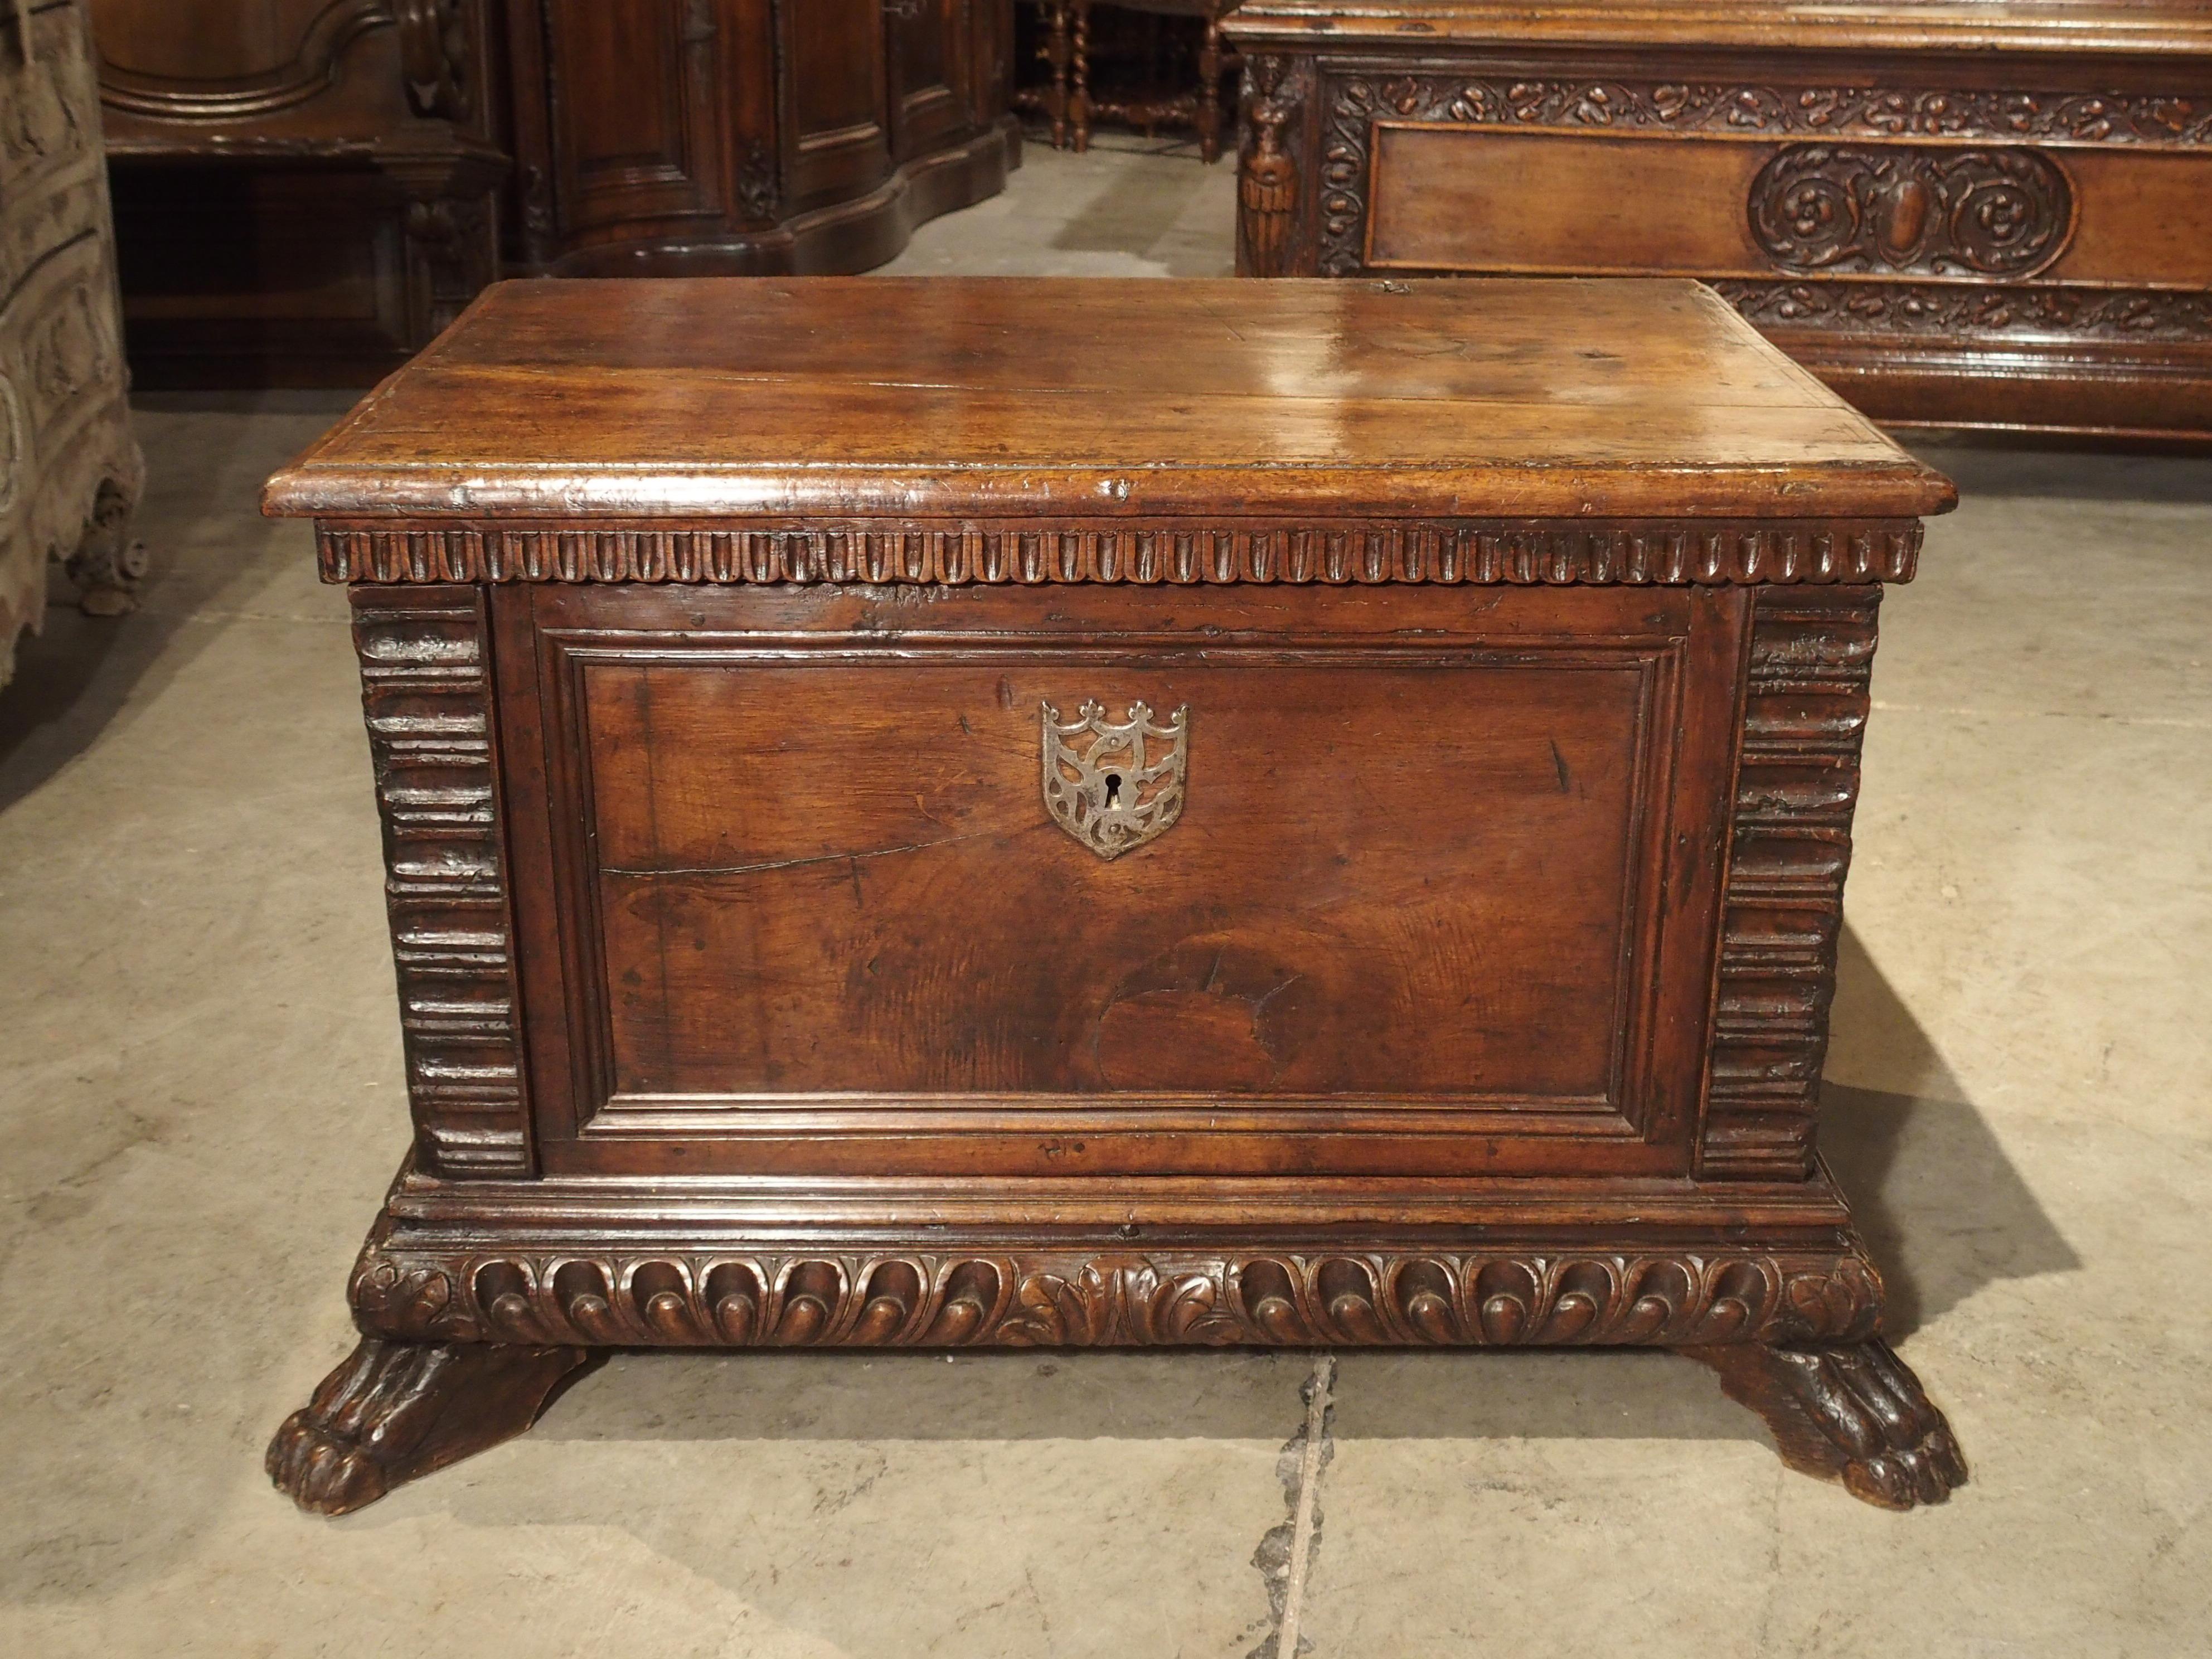 Italian Small 17th Century and Later Walnut Wood Trunk from Northern Italy